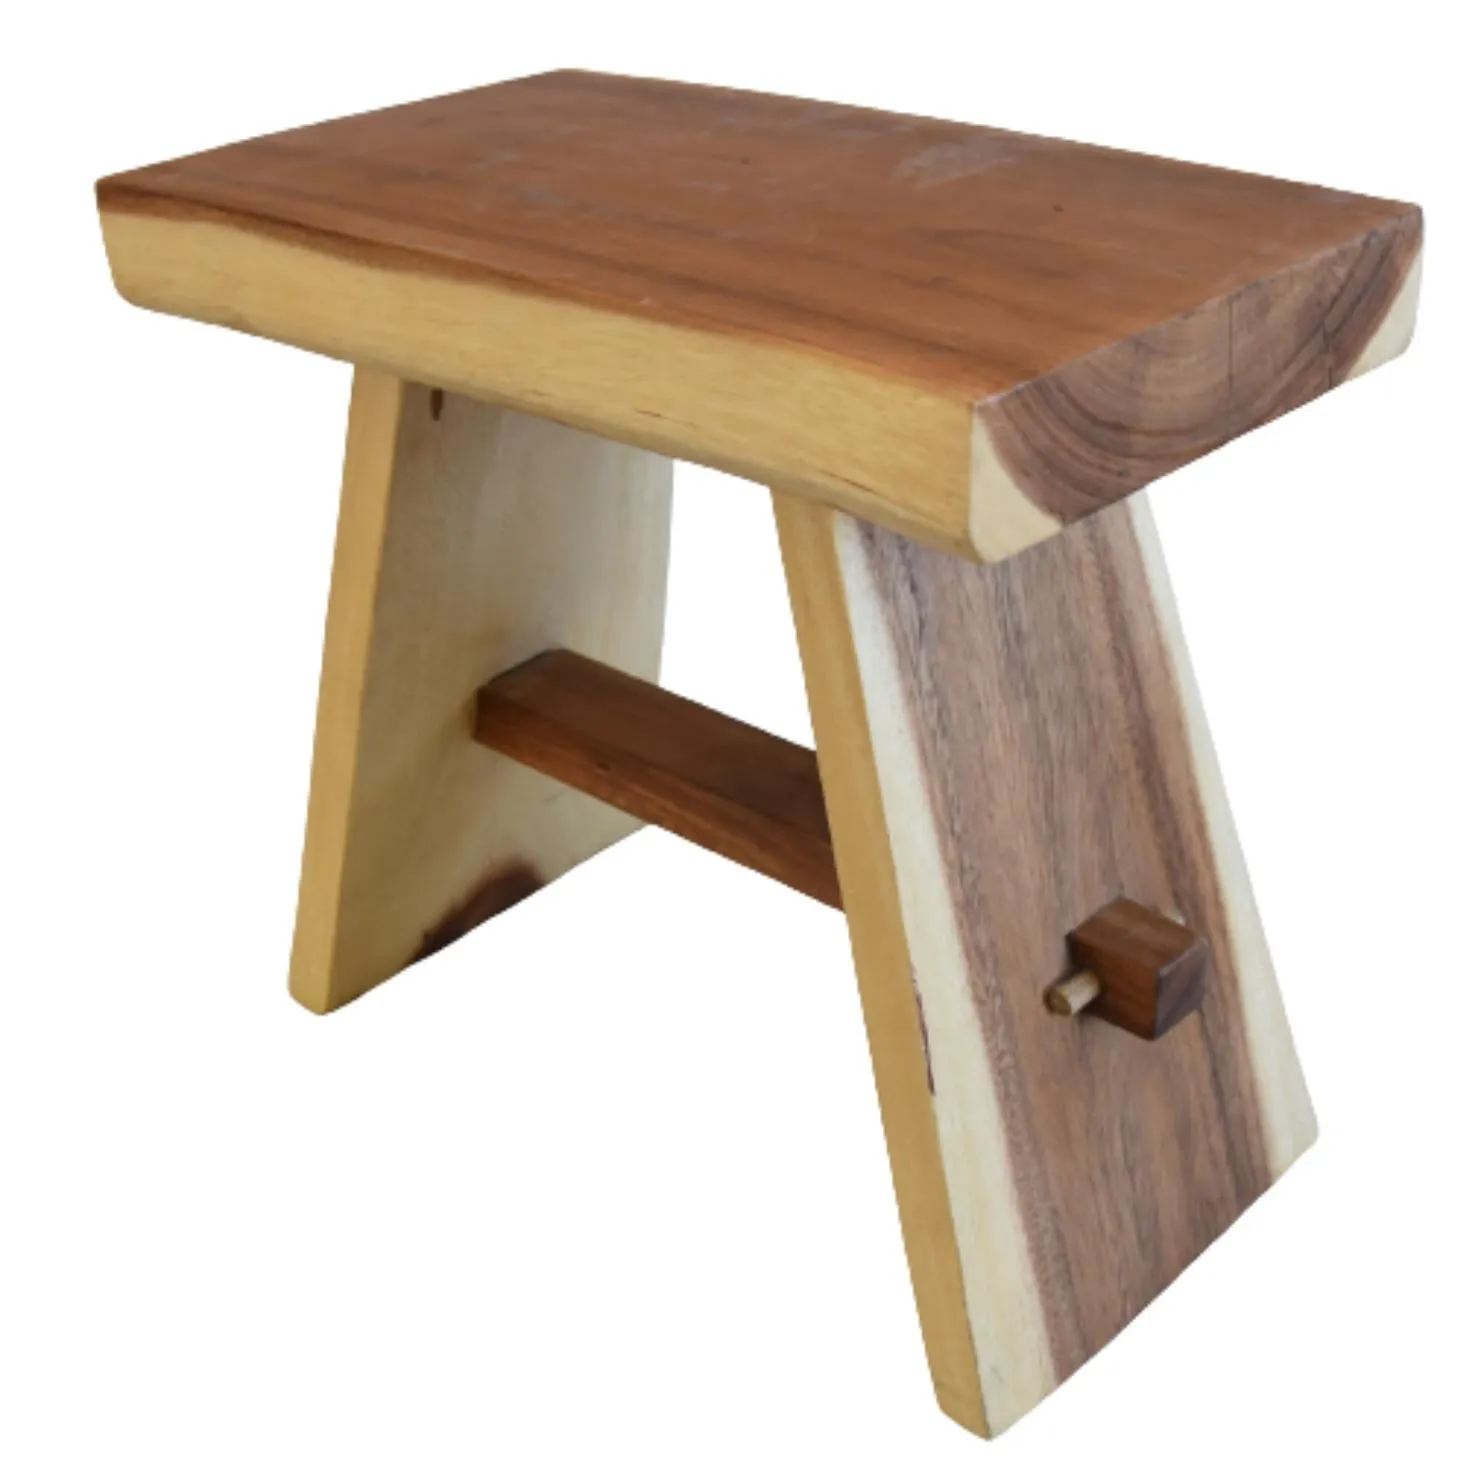 Munger Wood Side Table - Stool - or Bench - Handcrafted